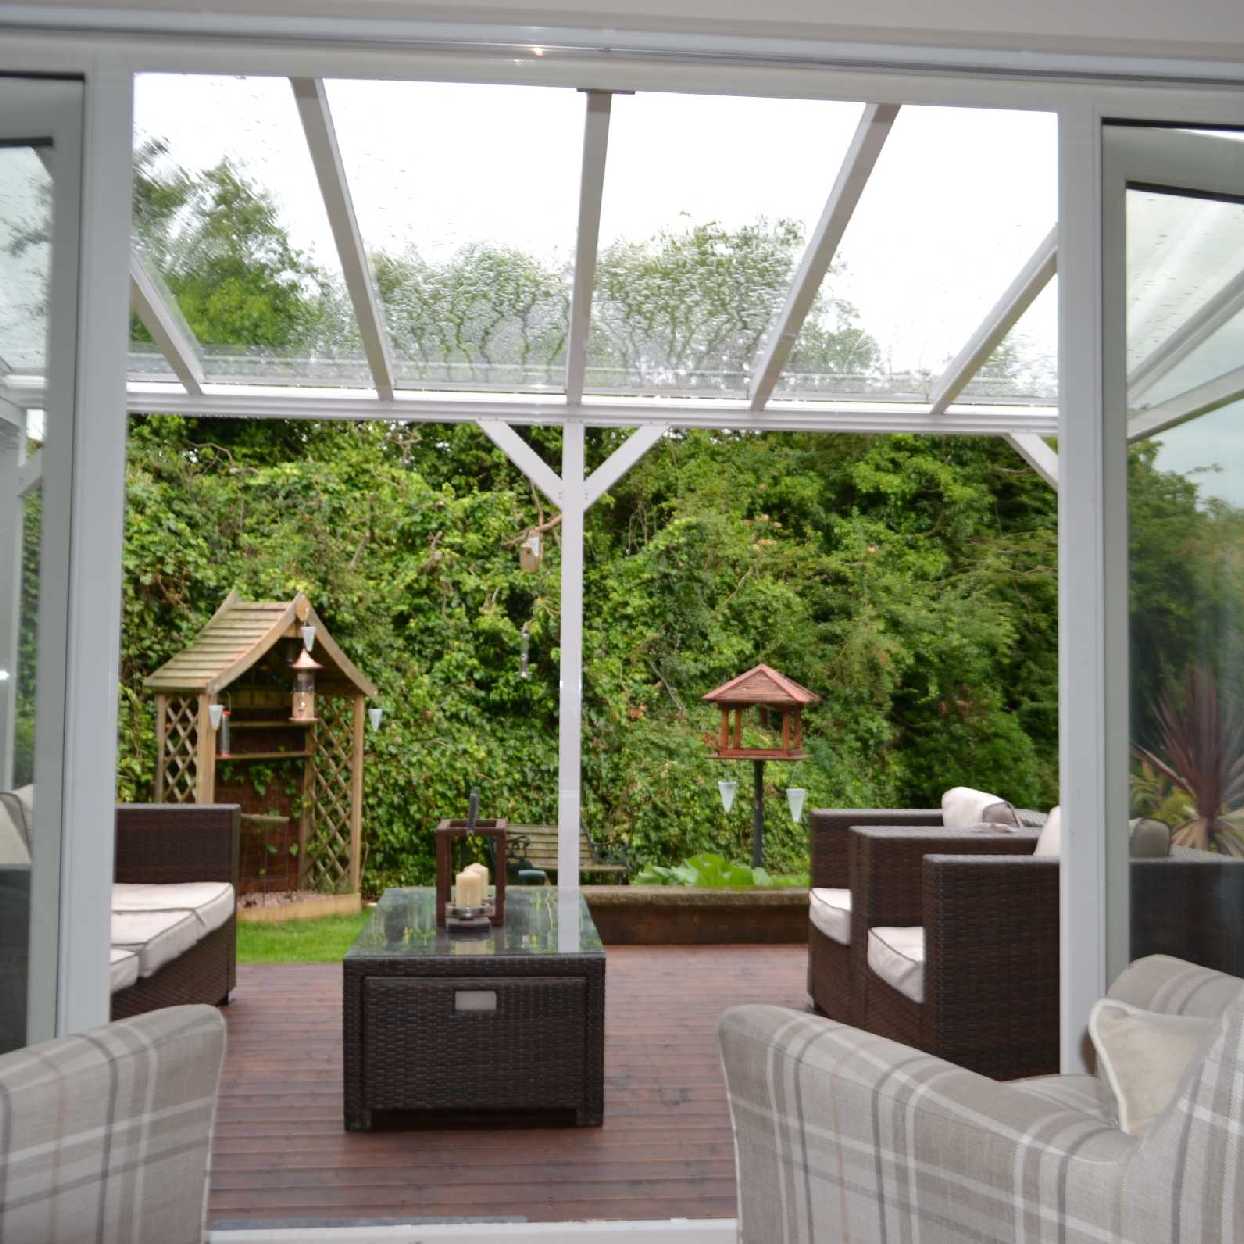 Great selection of Omega Smart Lean-To Canopy, White UNGLAZED for 6mm Glazing - 4.9m (W) x 1.5m (P), (3) Supporting Posts